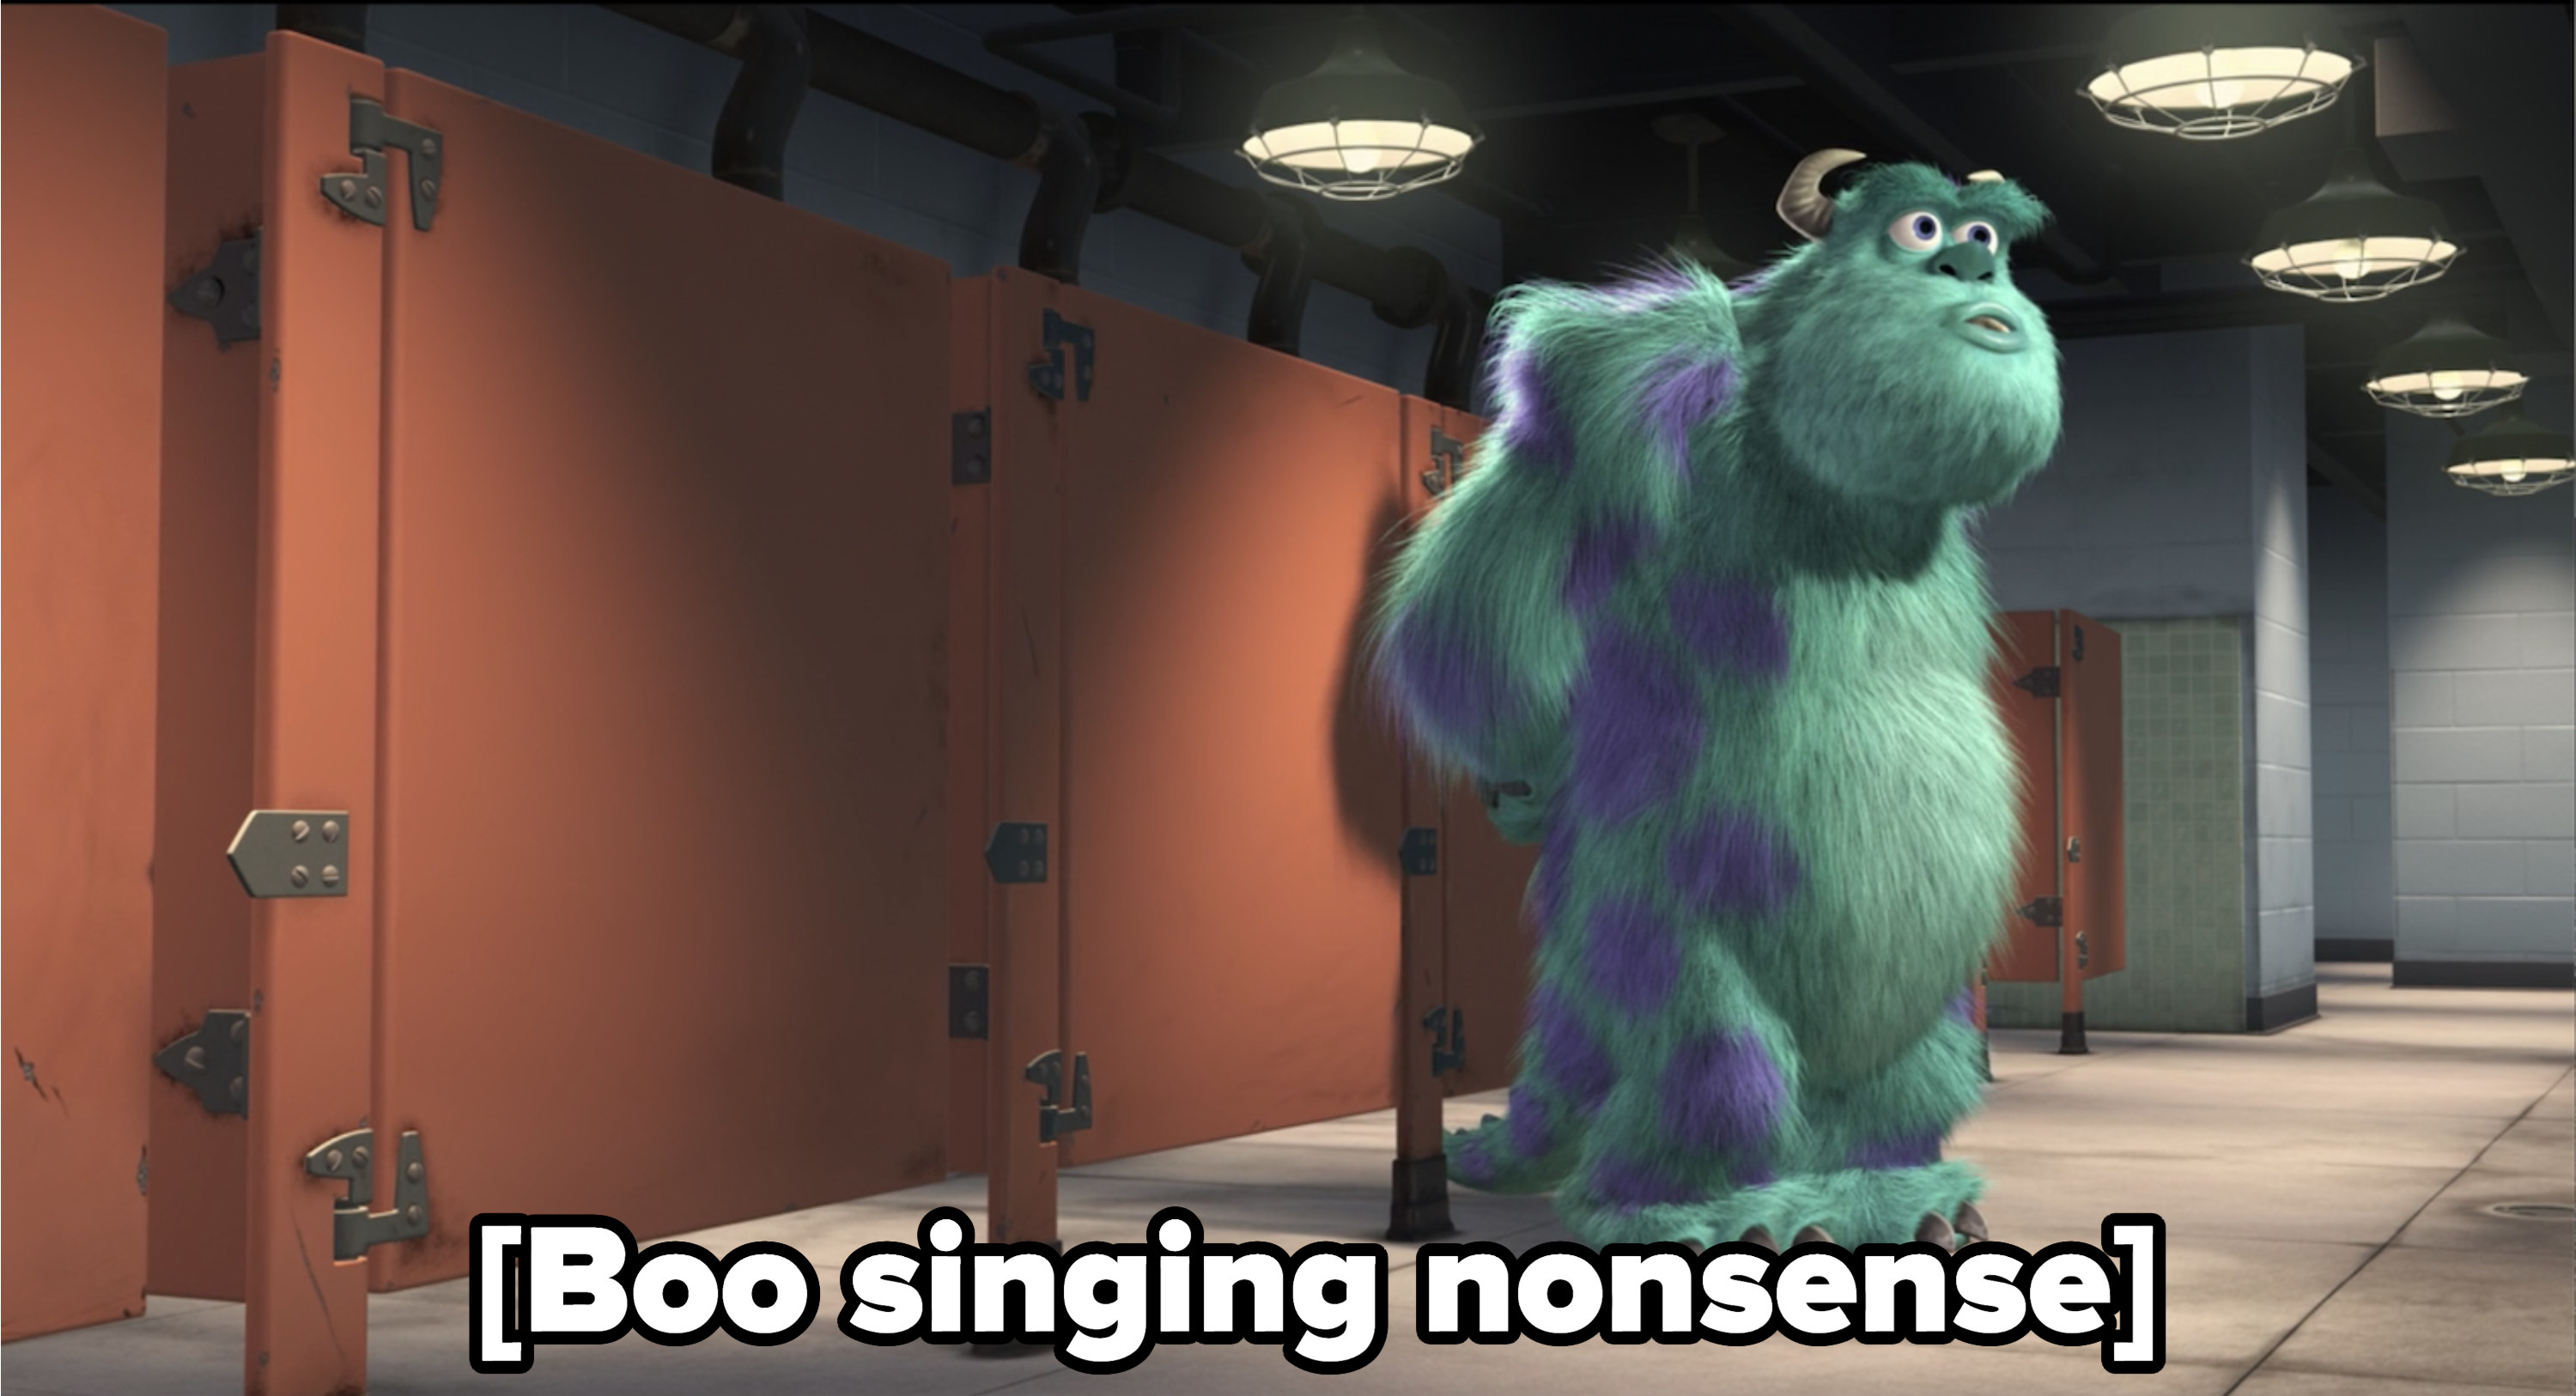 Sully waiting while Boo sings nonsense